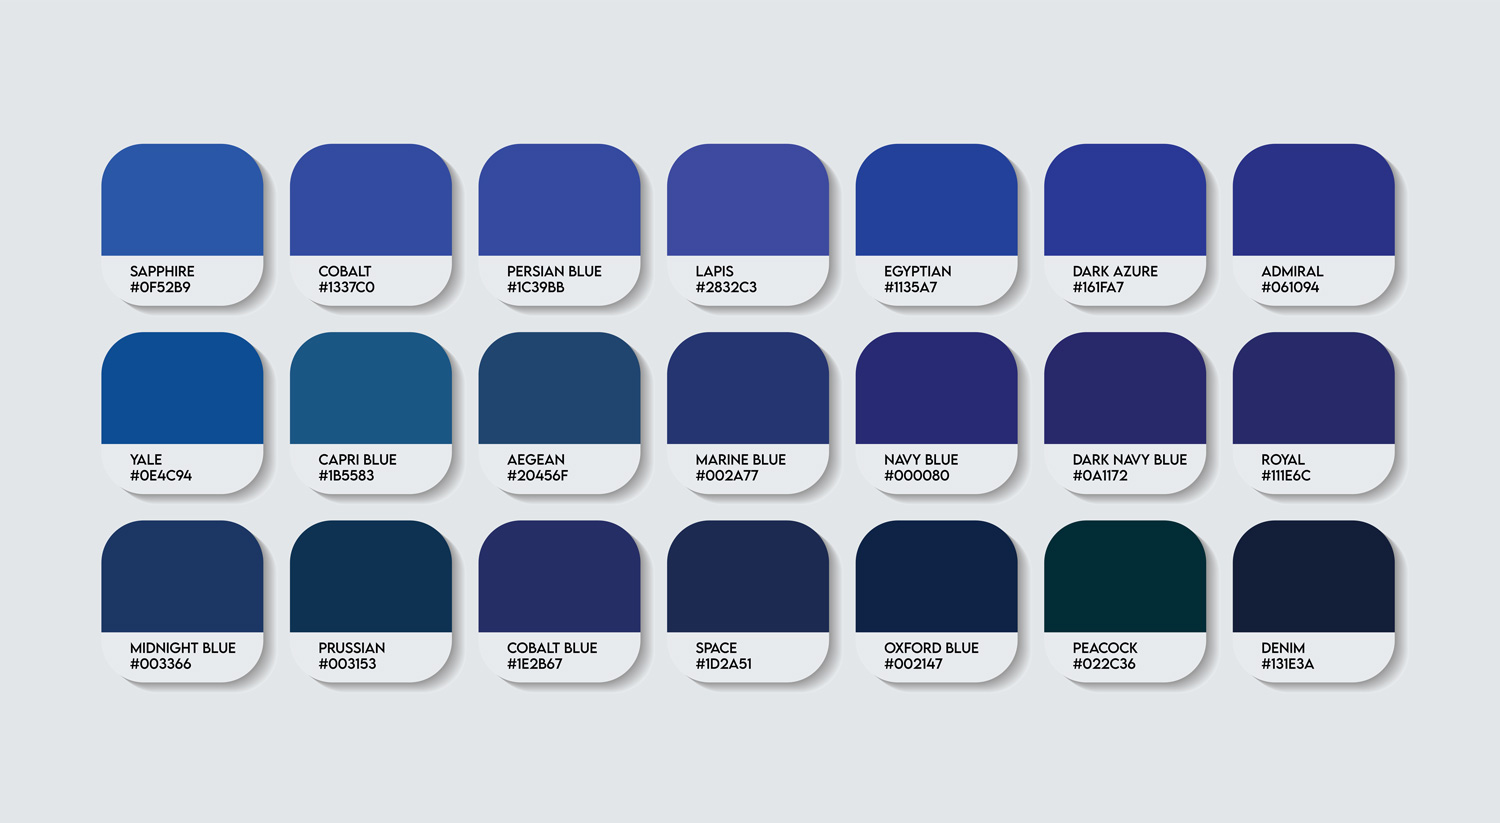 Dark Blue Color Code Guide Palette with Color Names. Catalog Samples Blue with RGB HEX codes. Dark Blue Colors Palette Vector, Wood and Plastic Dark Blue Color Palette, Fashion Trend Color icons